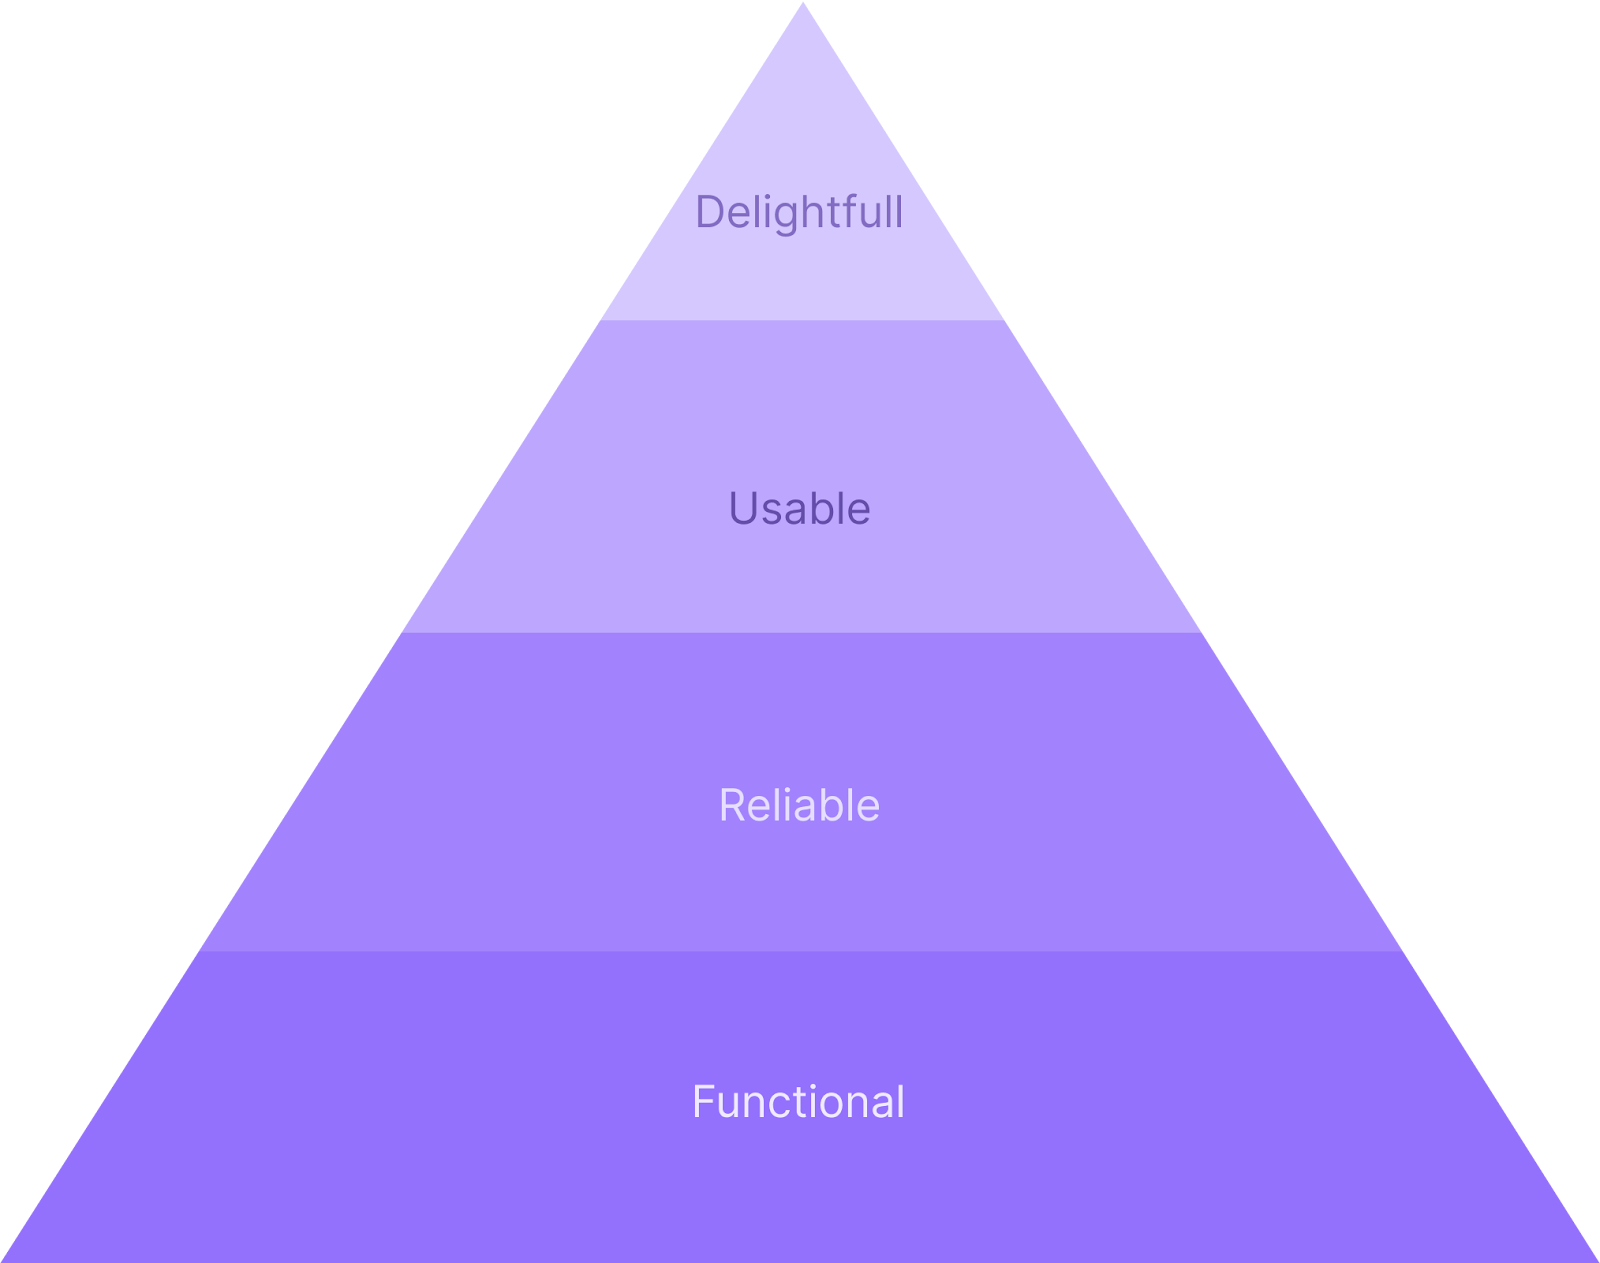 Pyramid divided into 4 parts and each one has a word inside. Starting from the top: Delightful, Usable, Reliable, Reliable, Functional.